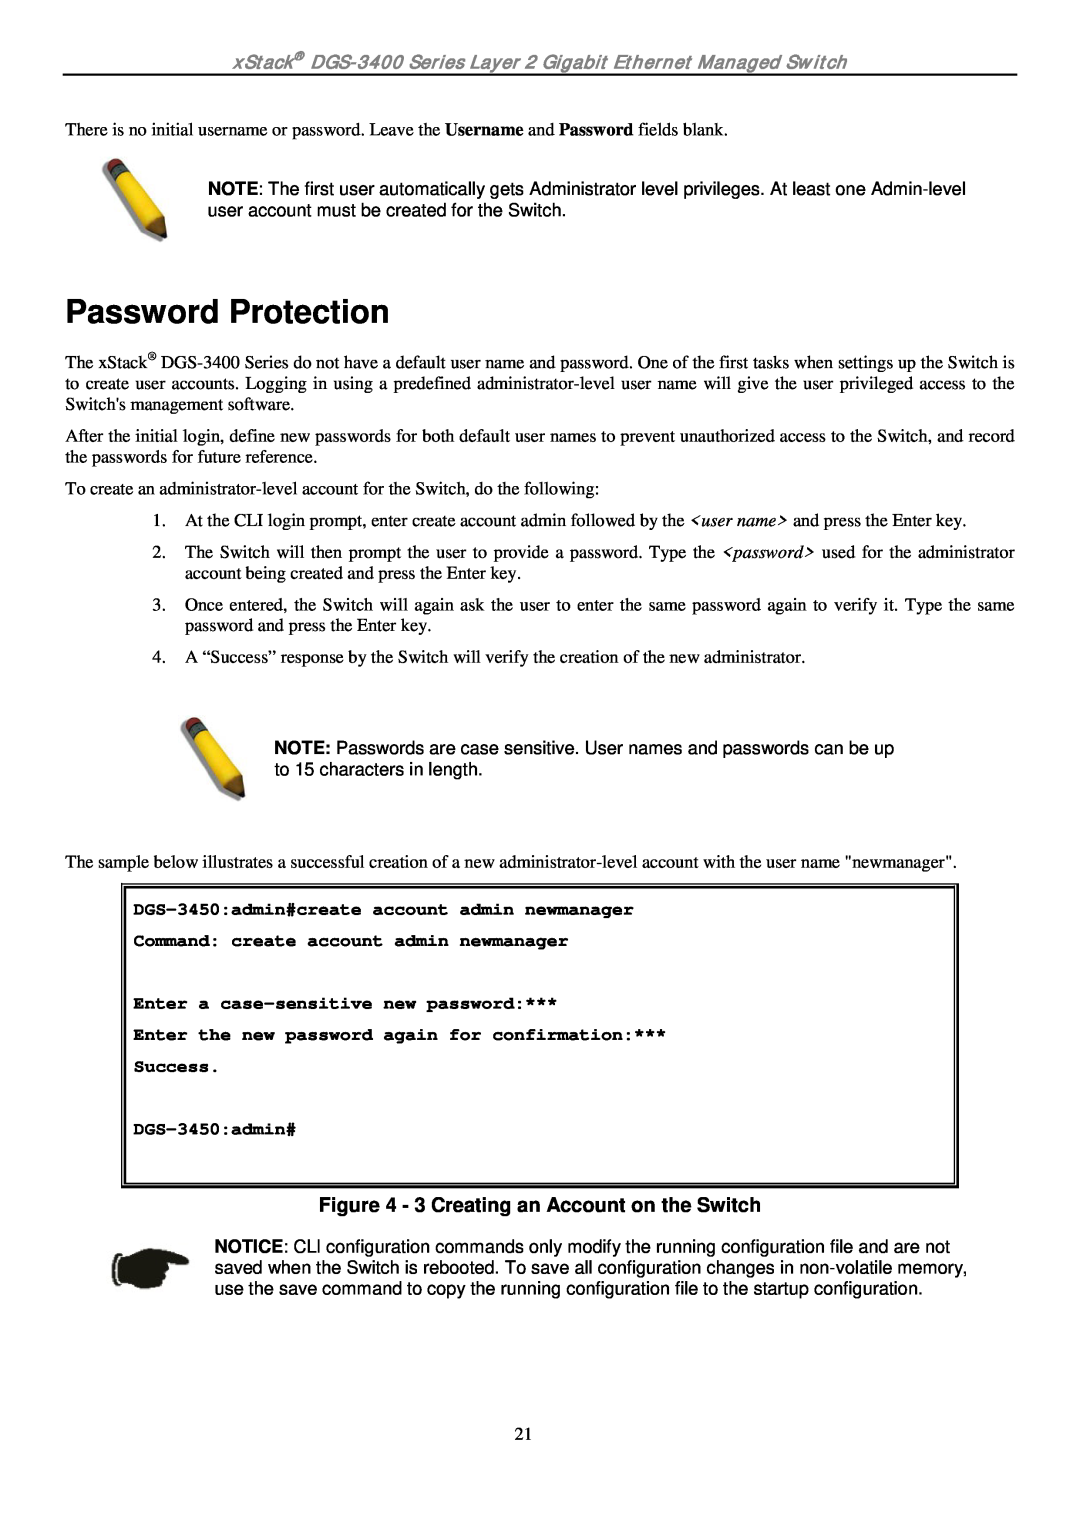 D-Link ethernet managed switch manual Password Protection, 3 Creating an Account on the Switch 